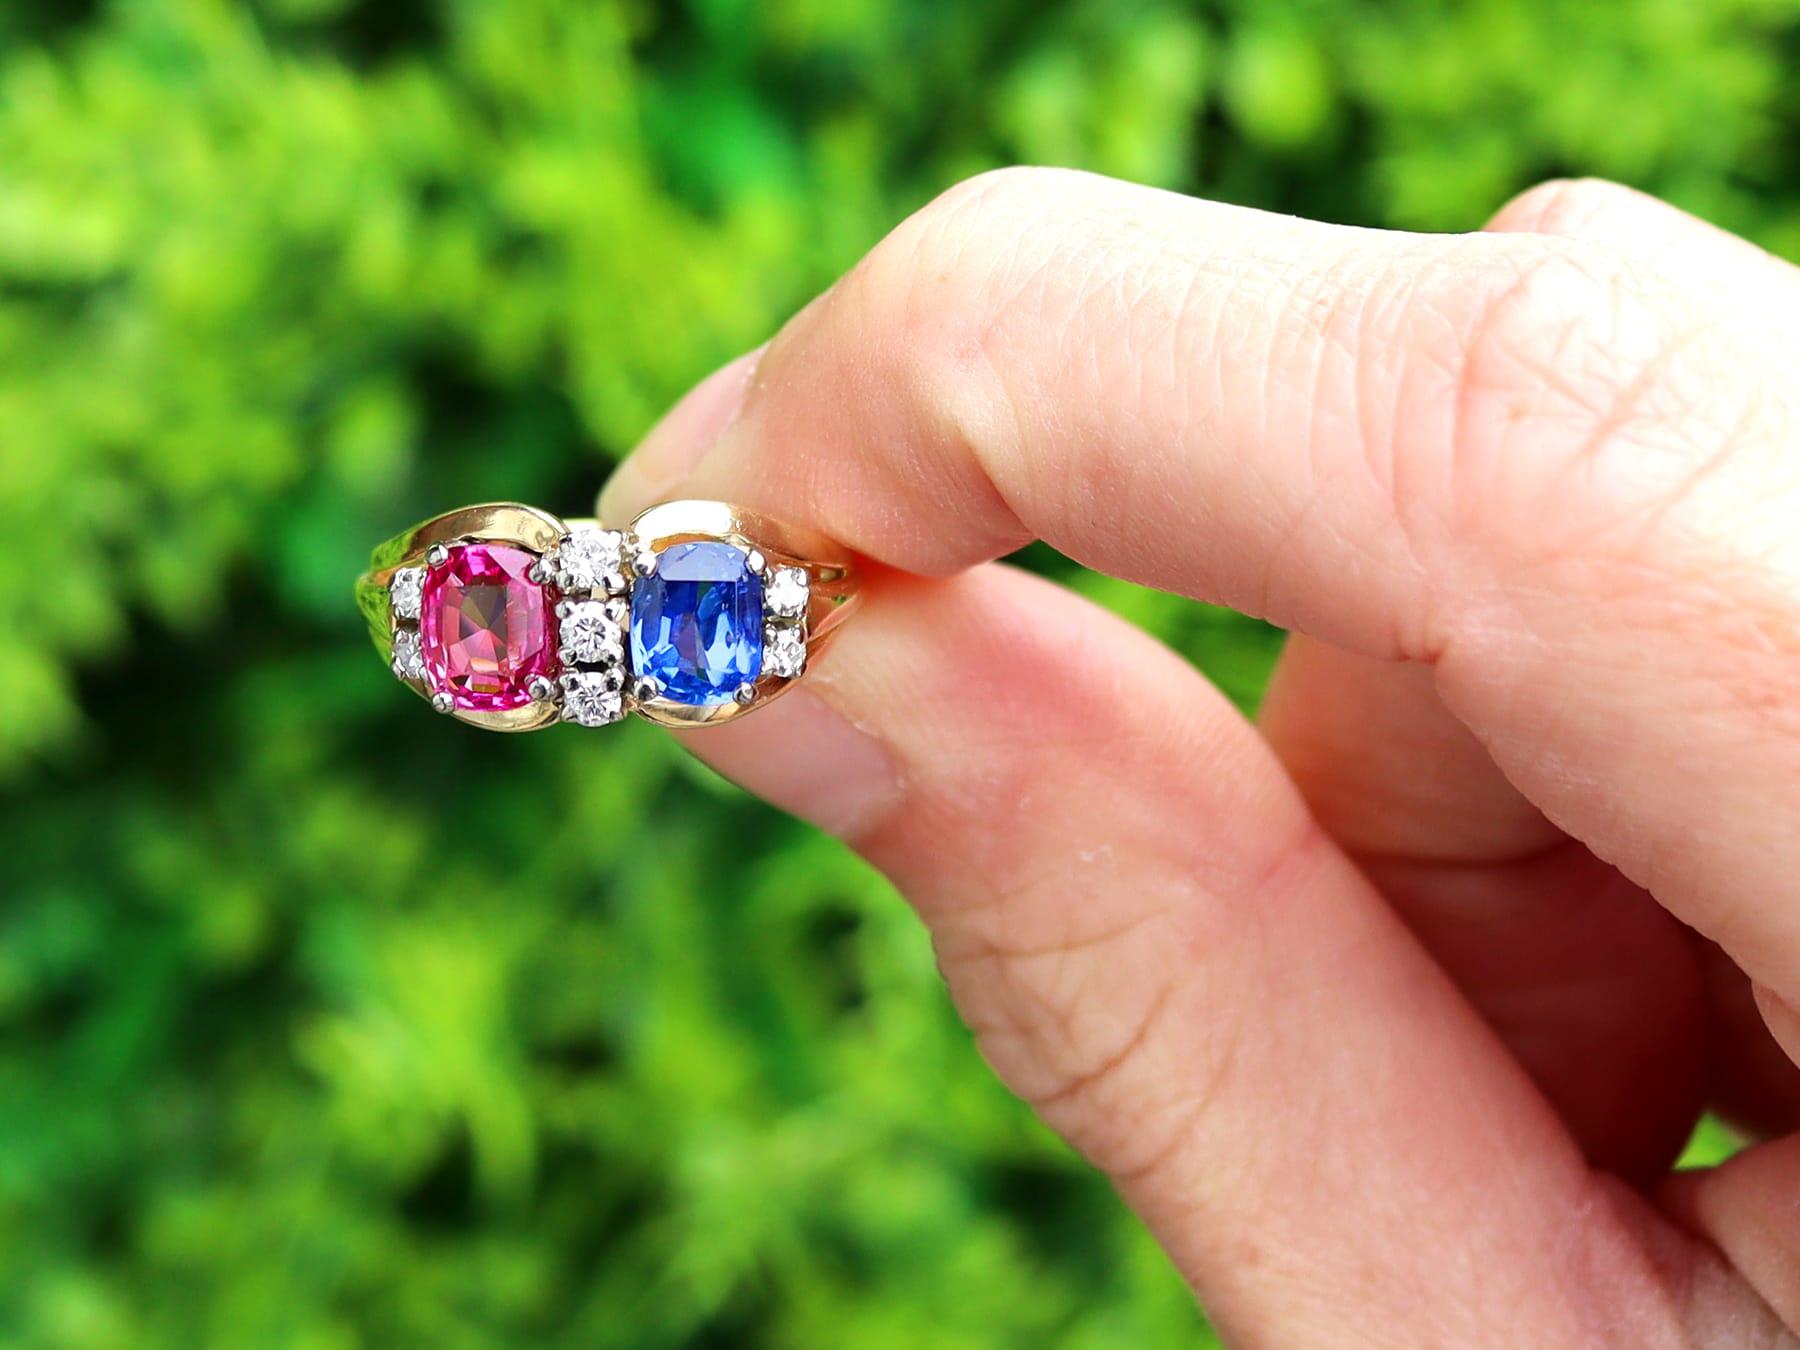 A stunning, fine and impressive vintage 2.40 carat pink and blue sapphire, 0.19 carat diamond, 18 karat yellow gold and white gold set gold dress ring; part of our sapphire ring collections

This stunning, fine and impressive sapphire ring has been